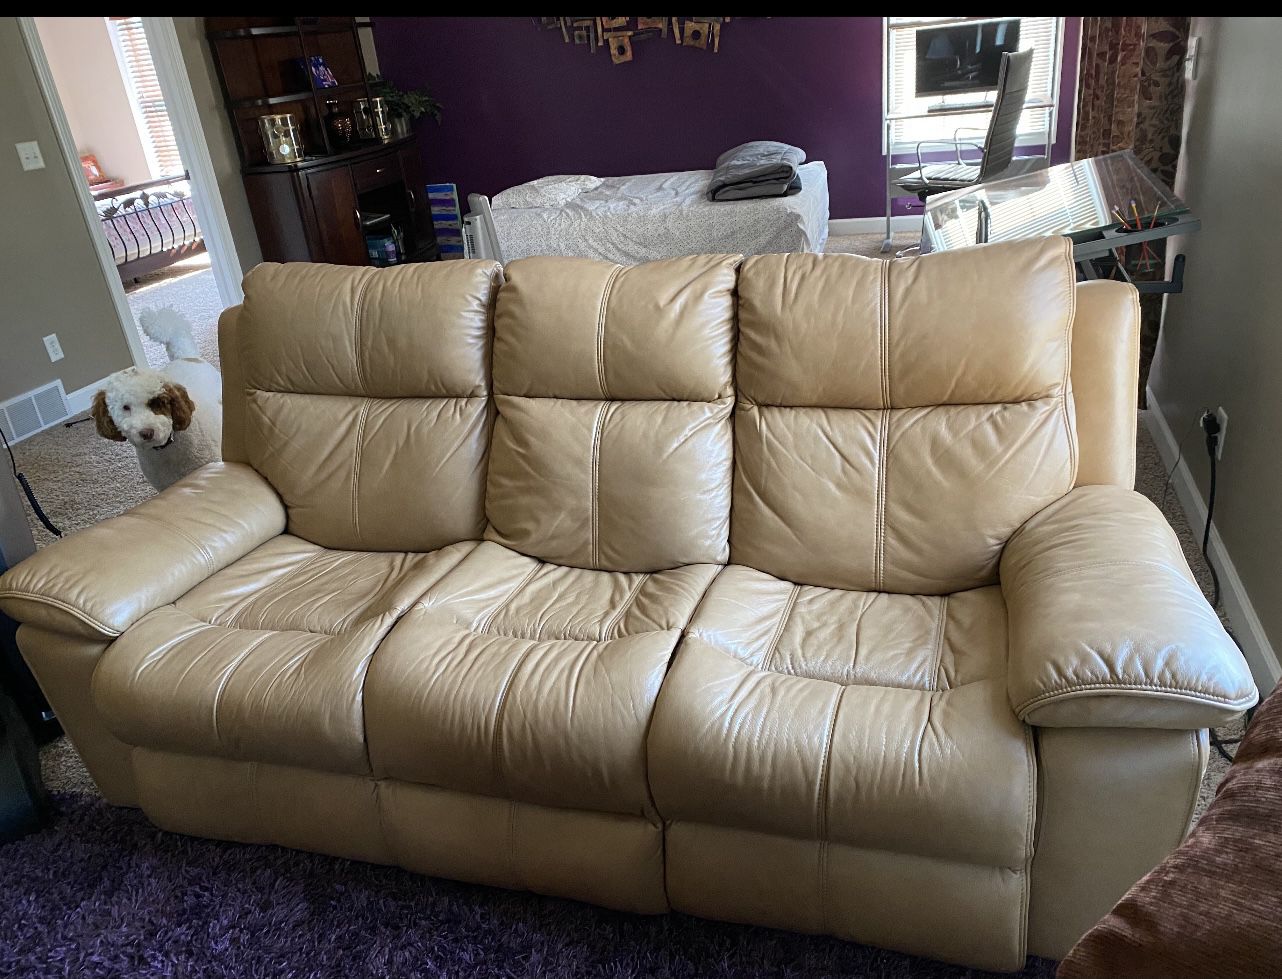 Tan leather sofa set is for sale Ana- they are power recliners. Price 1600